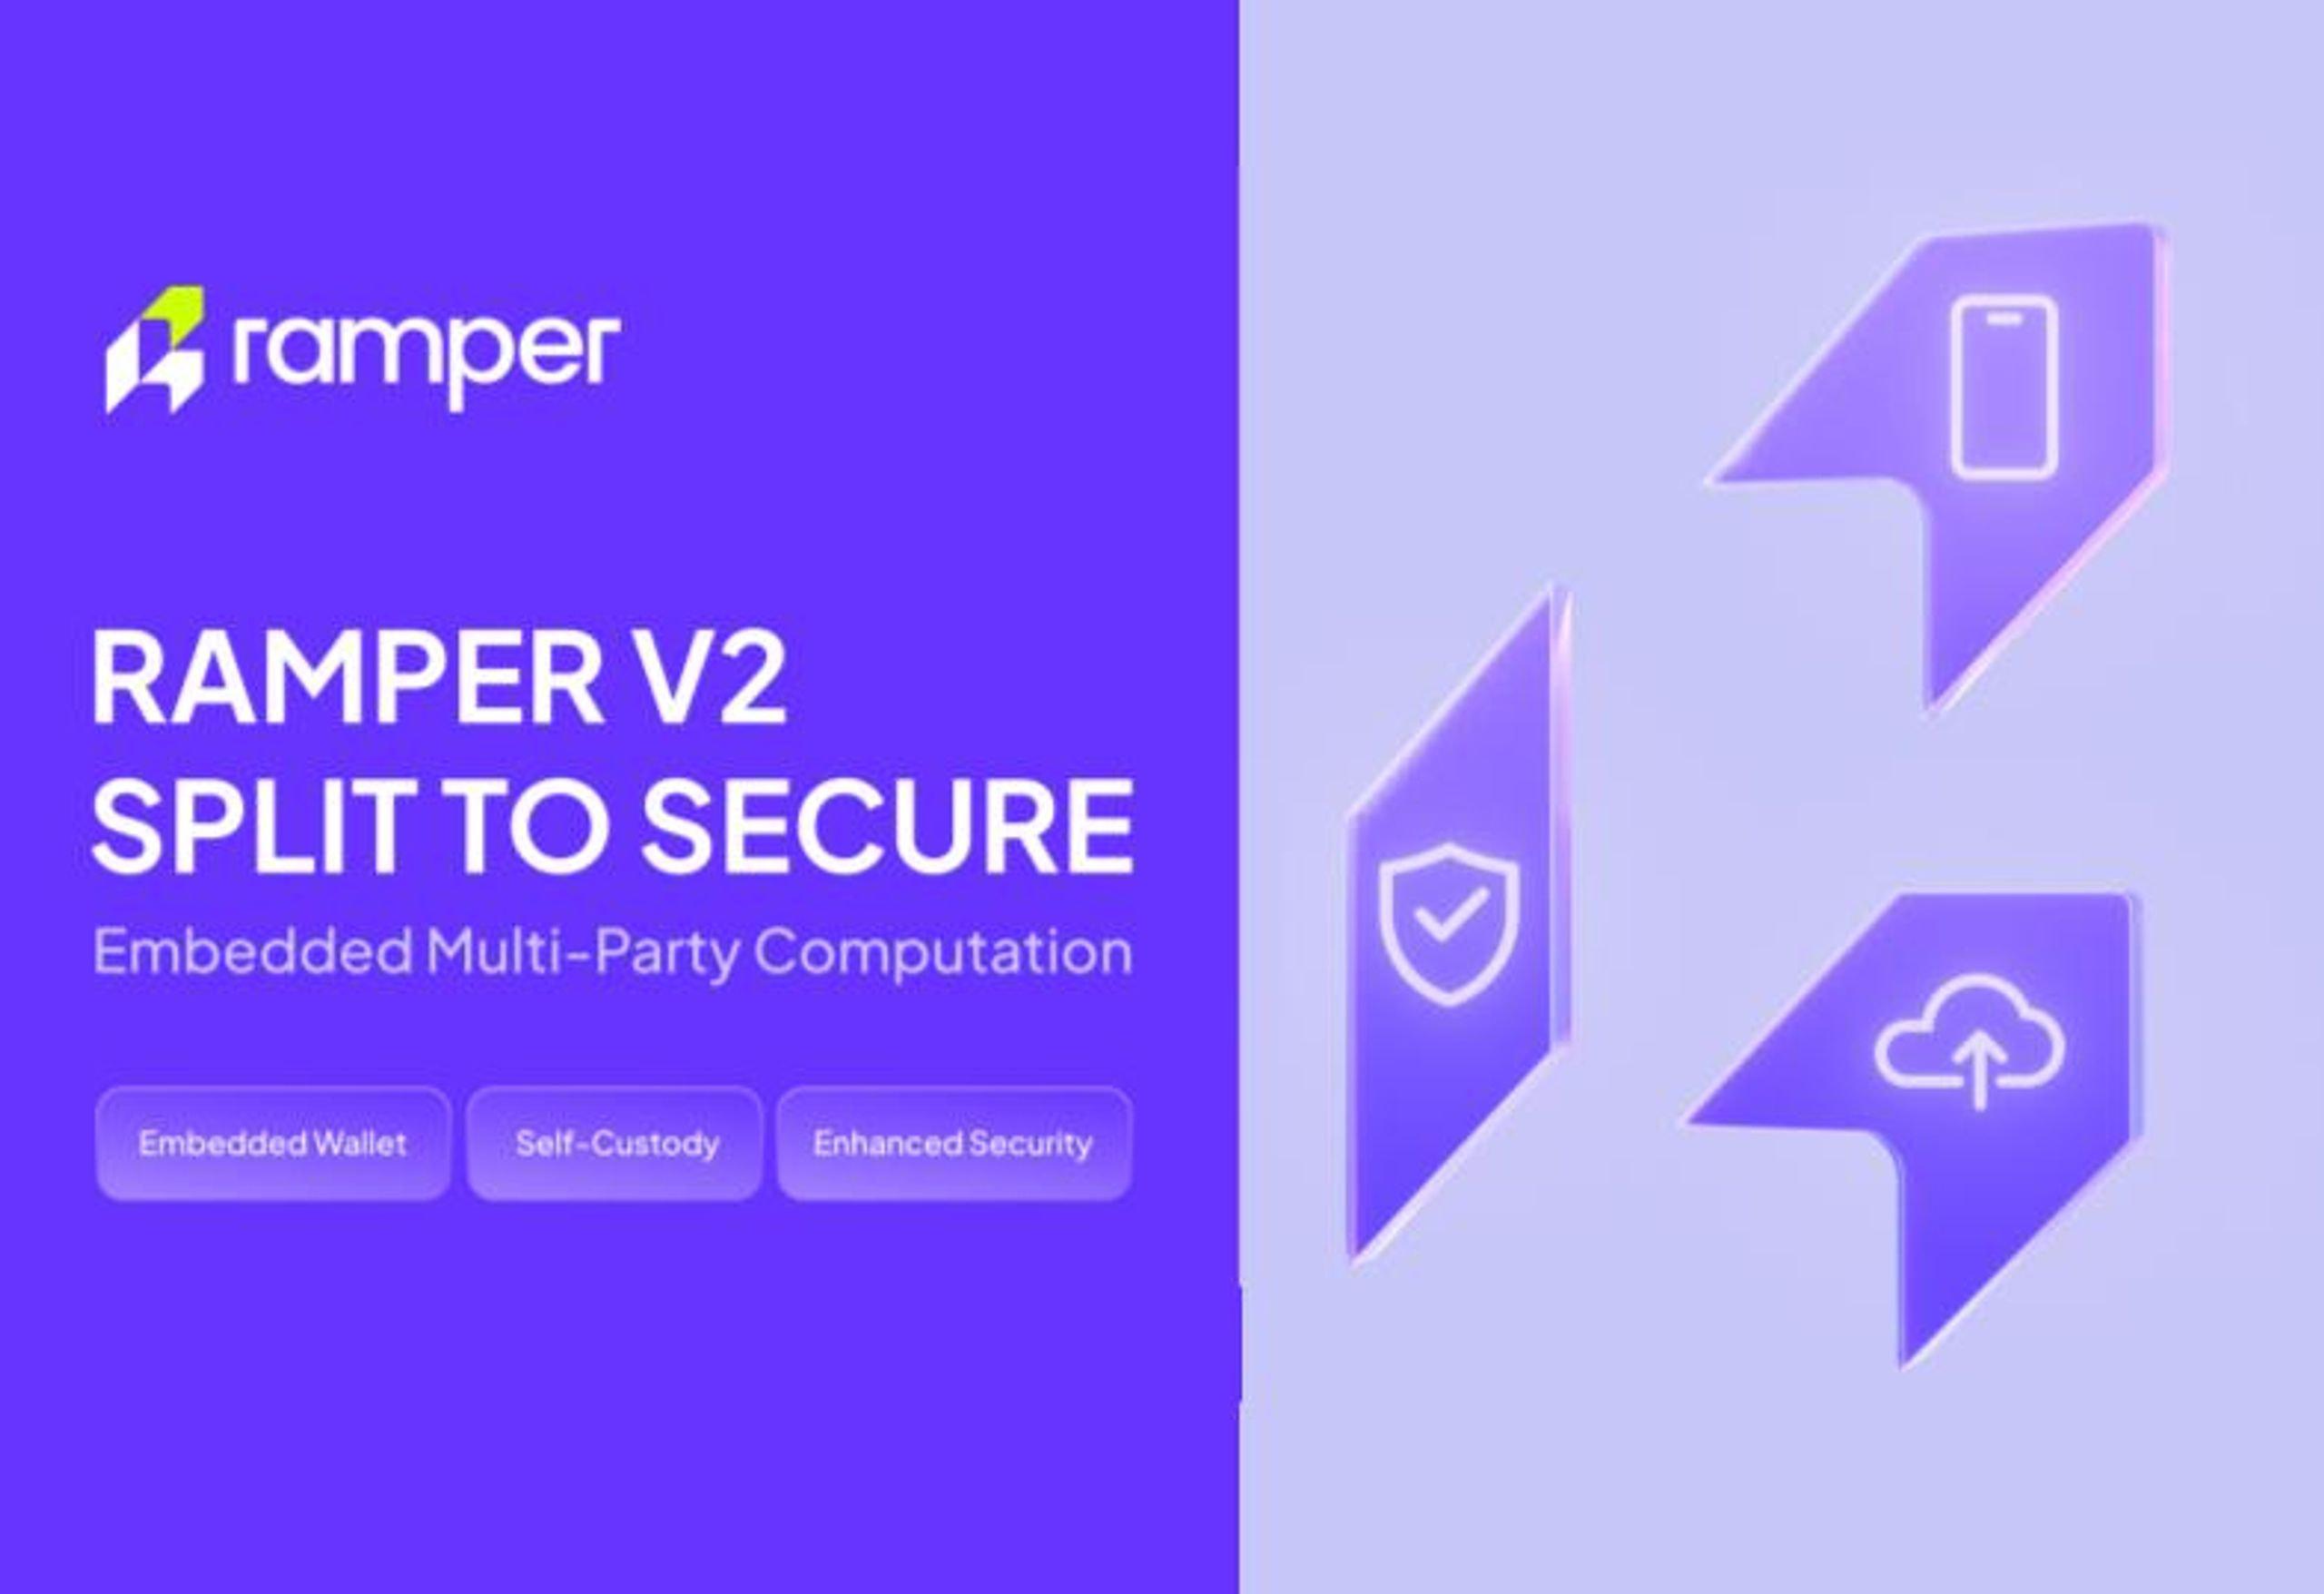 Introducing Ramper V2: Enhanced security with Embedded Multi-Party Computation (EMPC)